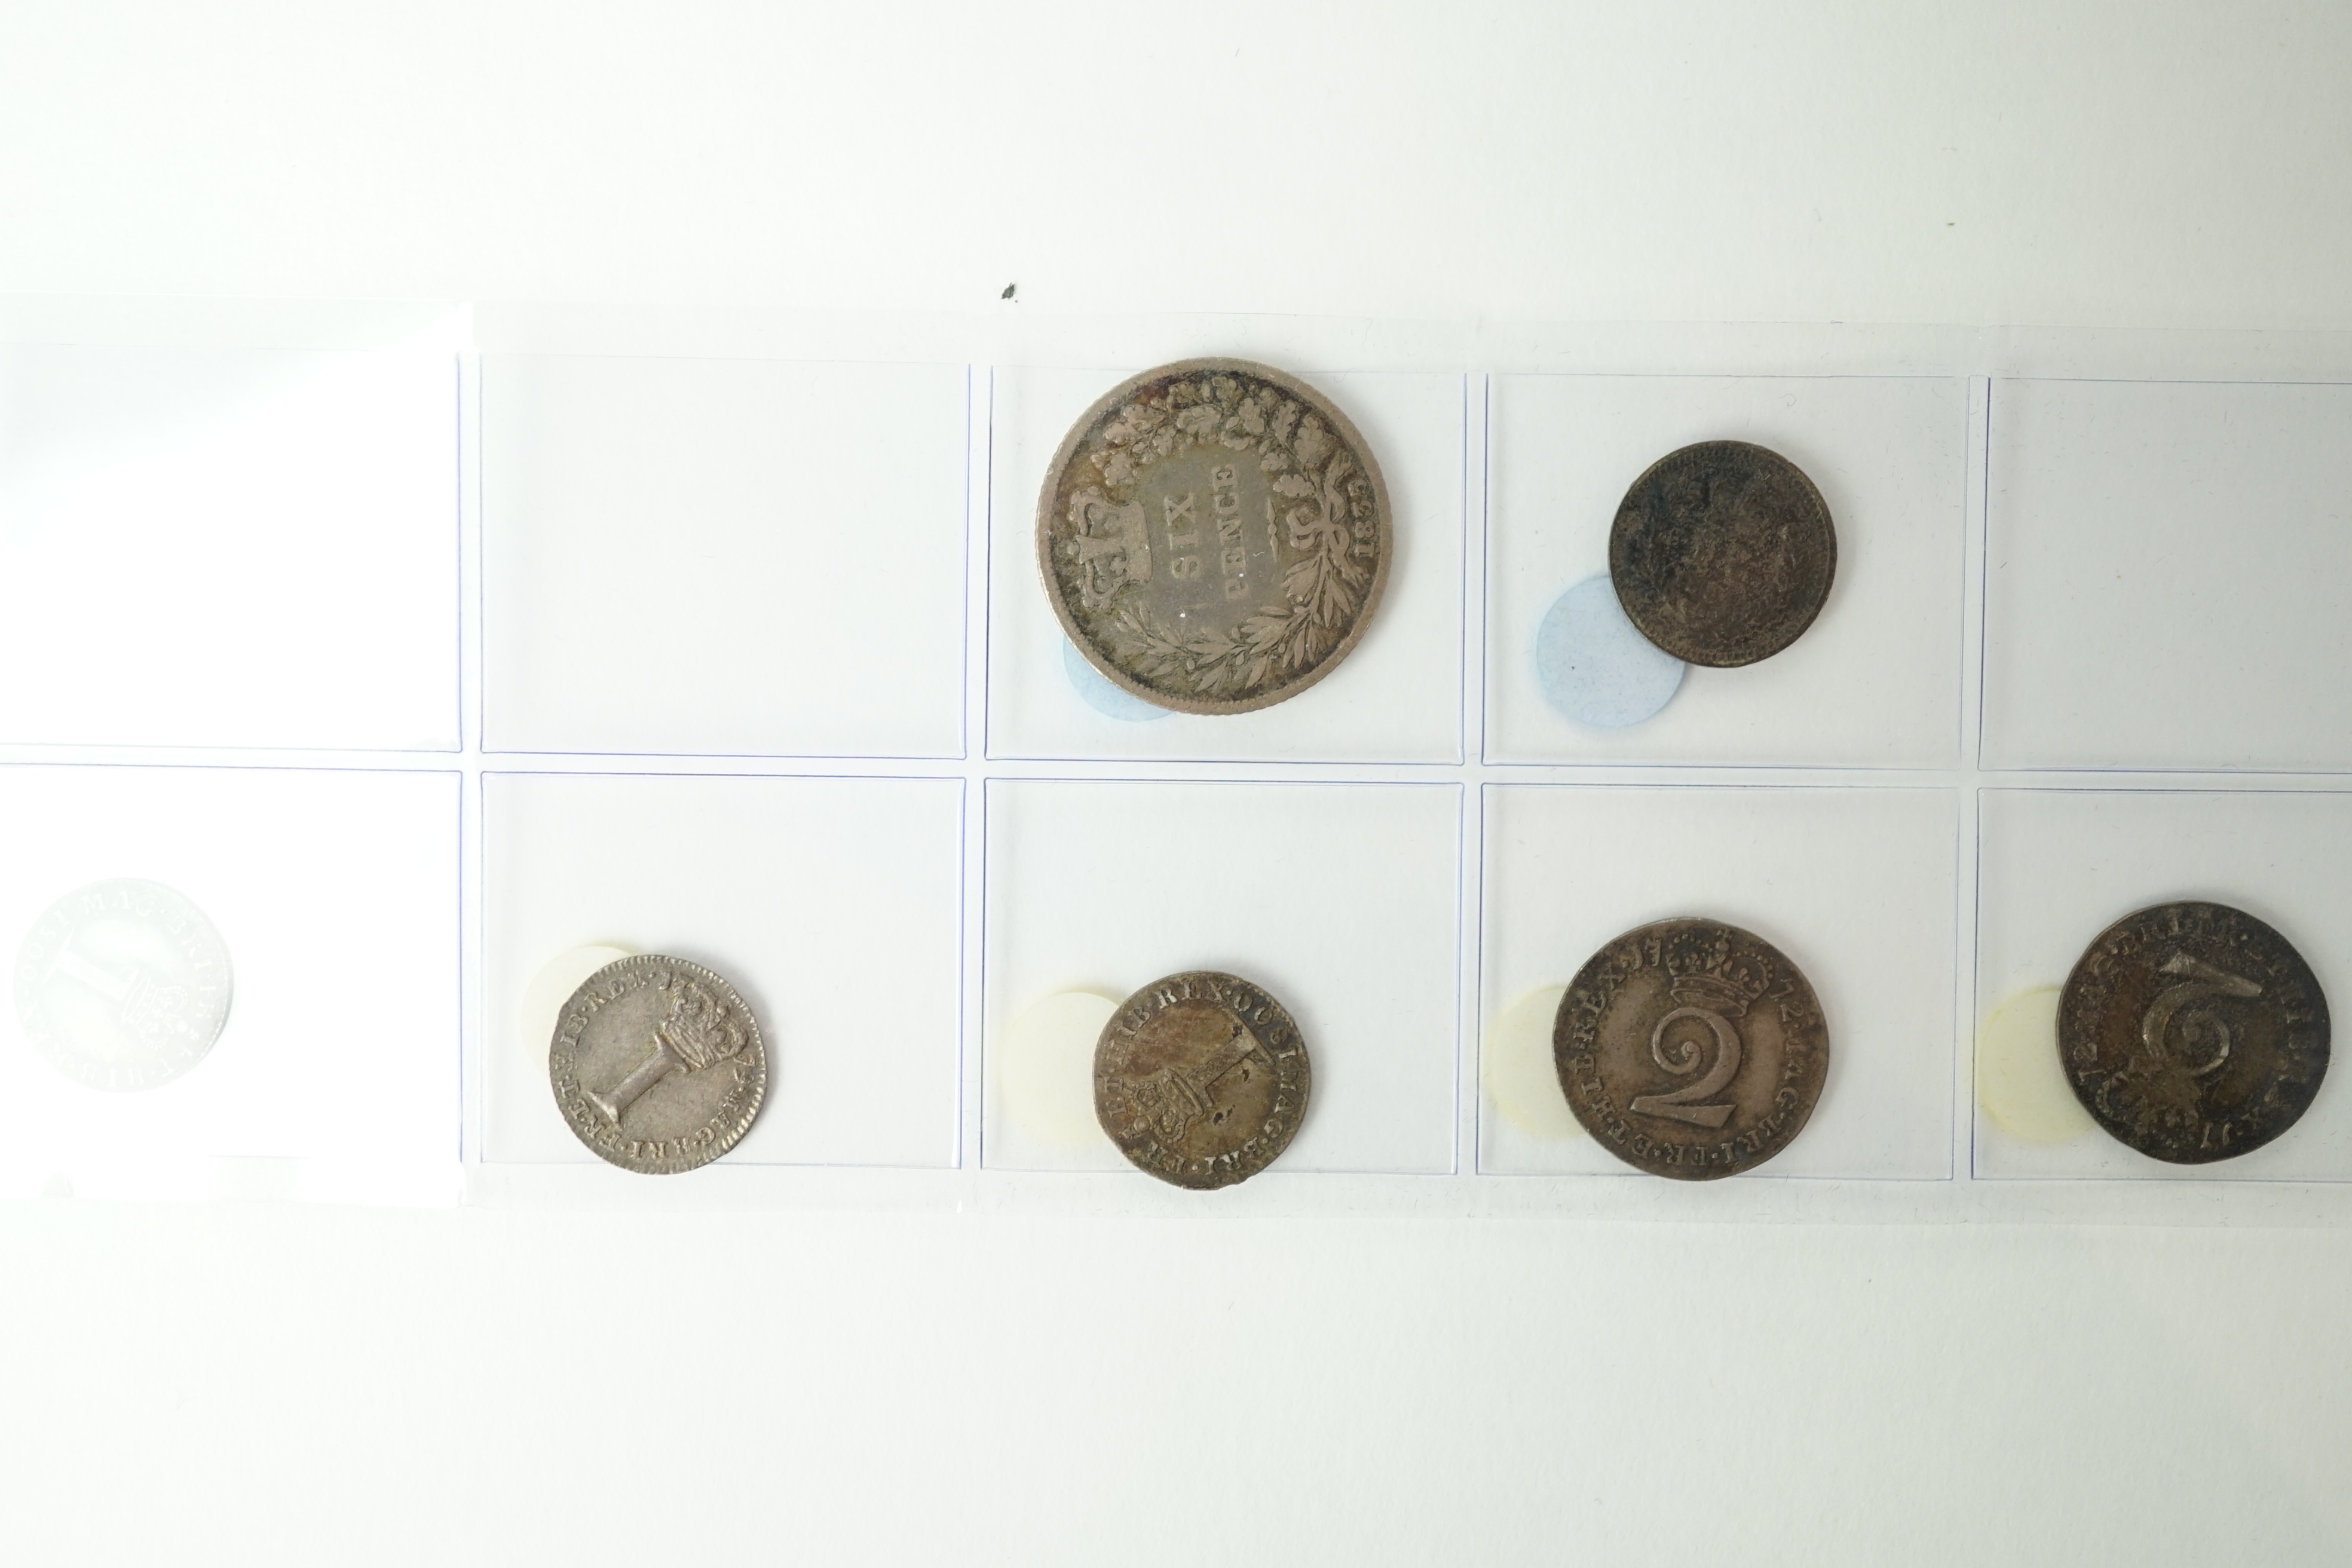 British silver coins, George II to William IV, 1d to sixpence, including George II 1d 1739, 2d 1735, two George III 3d 1762, two 2d 1772, 1d 1779, 1800, George IV 1d 1823 and William IV one and a half pence, and other sm